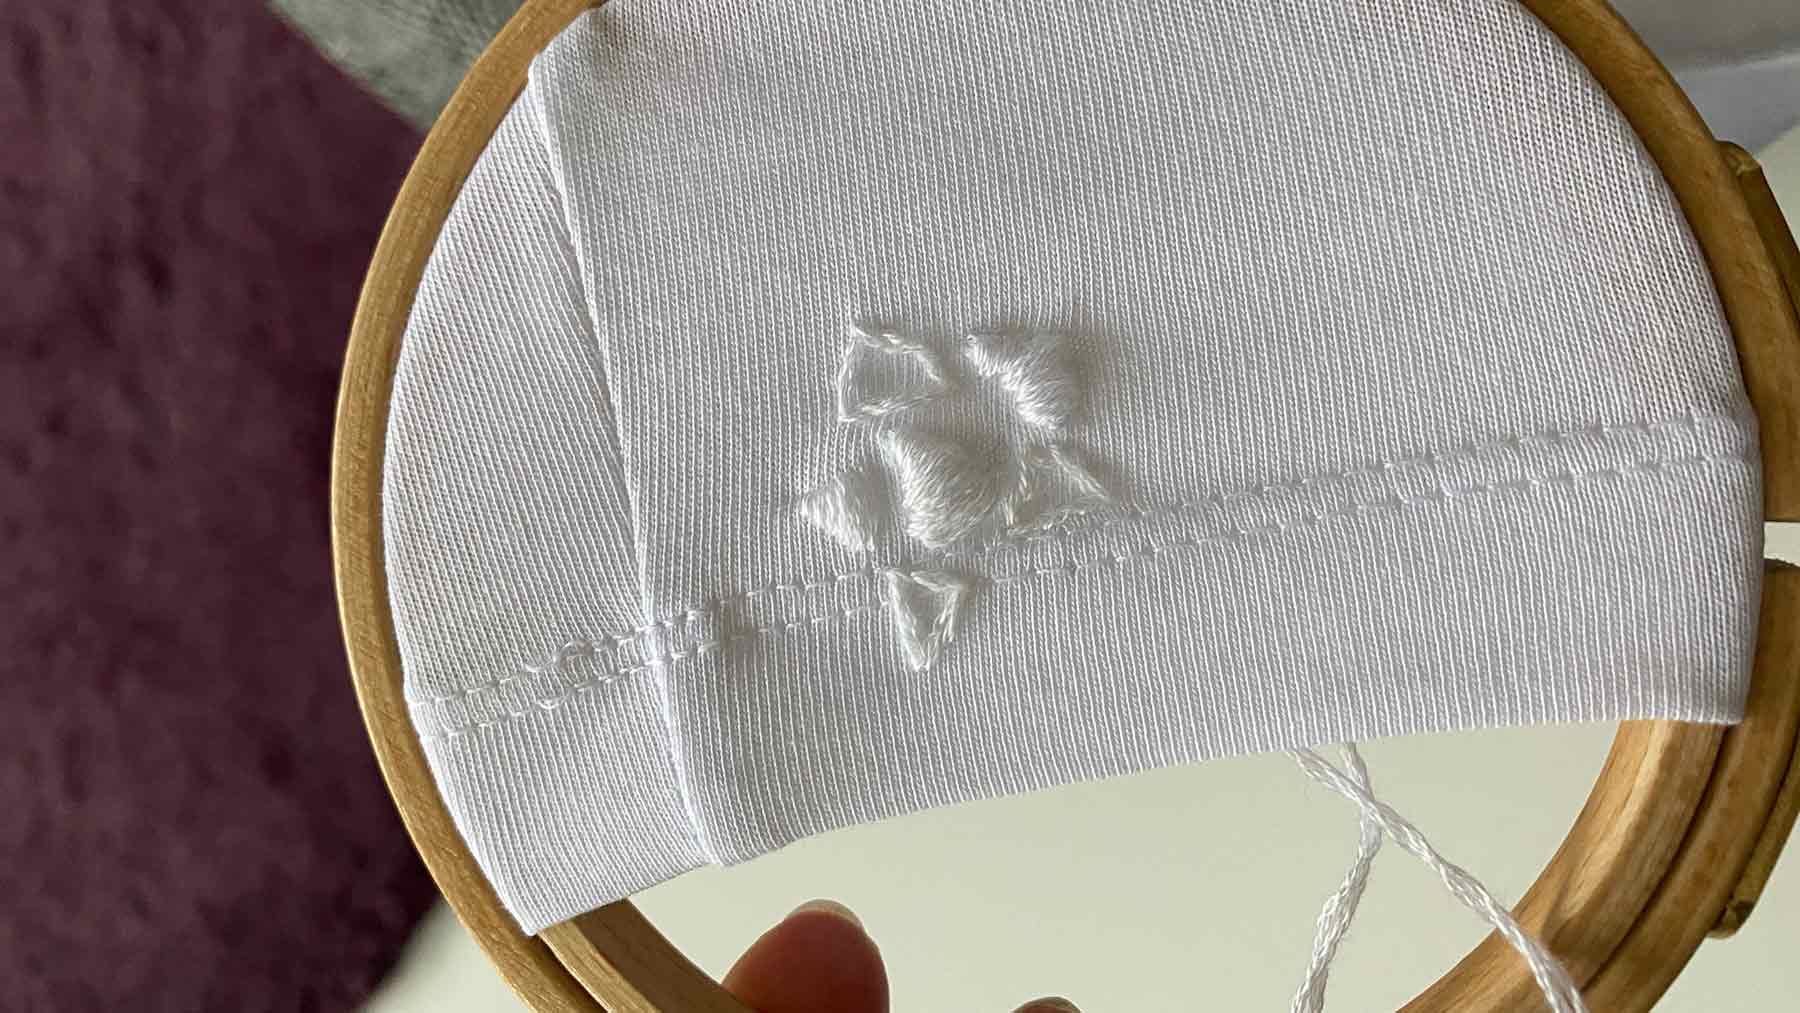 White geometric rose embroidery being embroidered onto a white t-shirt to mend a hole